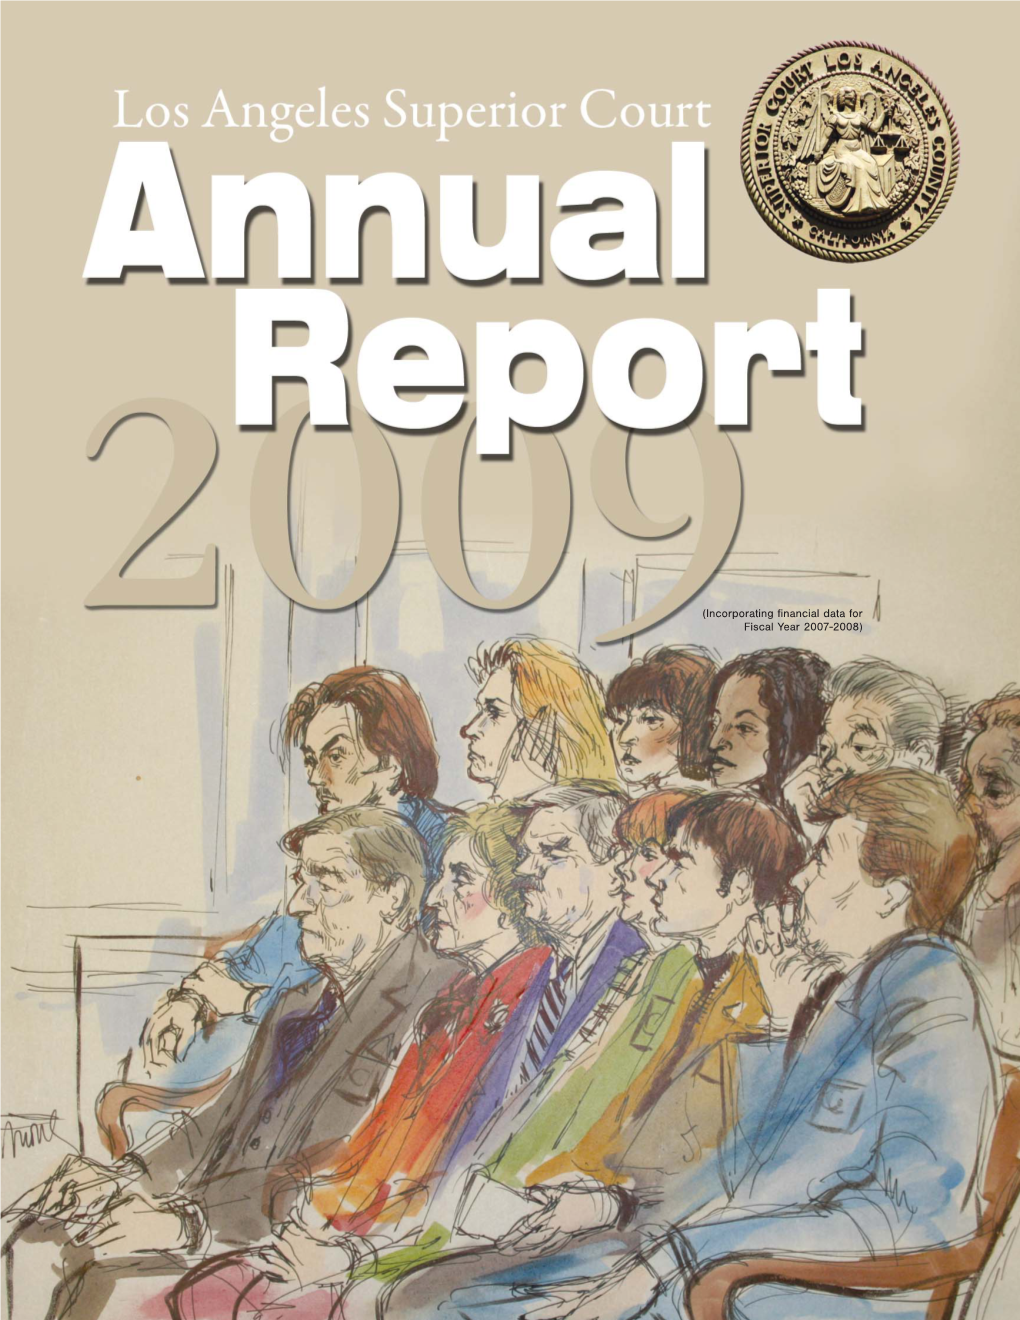 Los Angeles Superior Court Annual Report 2009 Edition